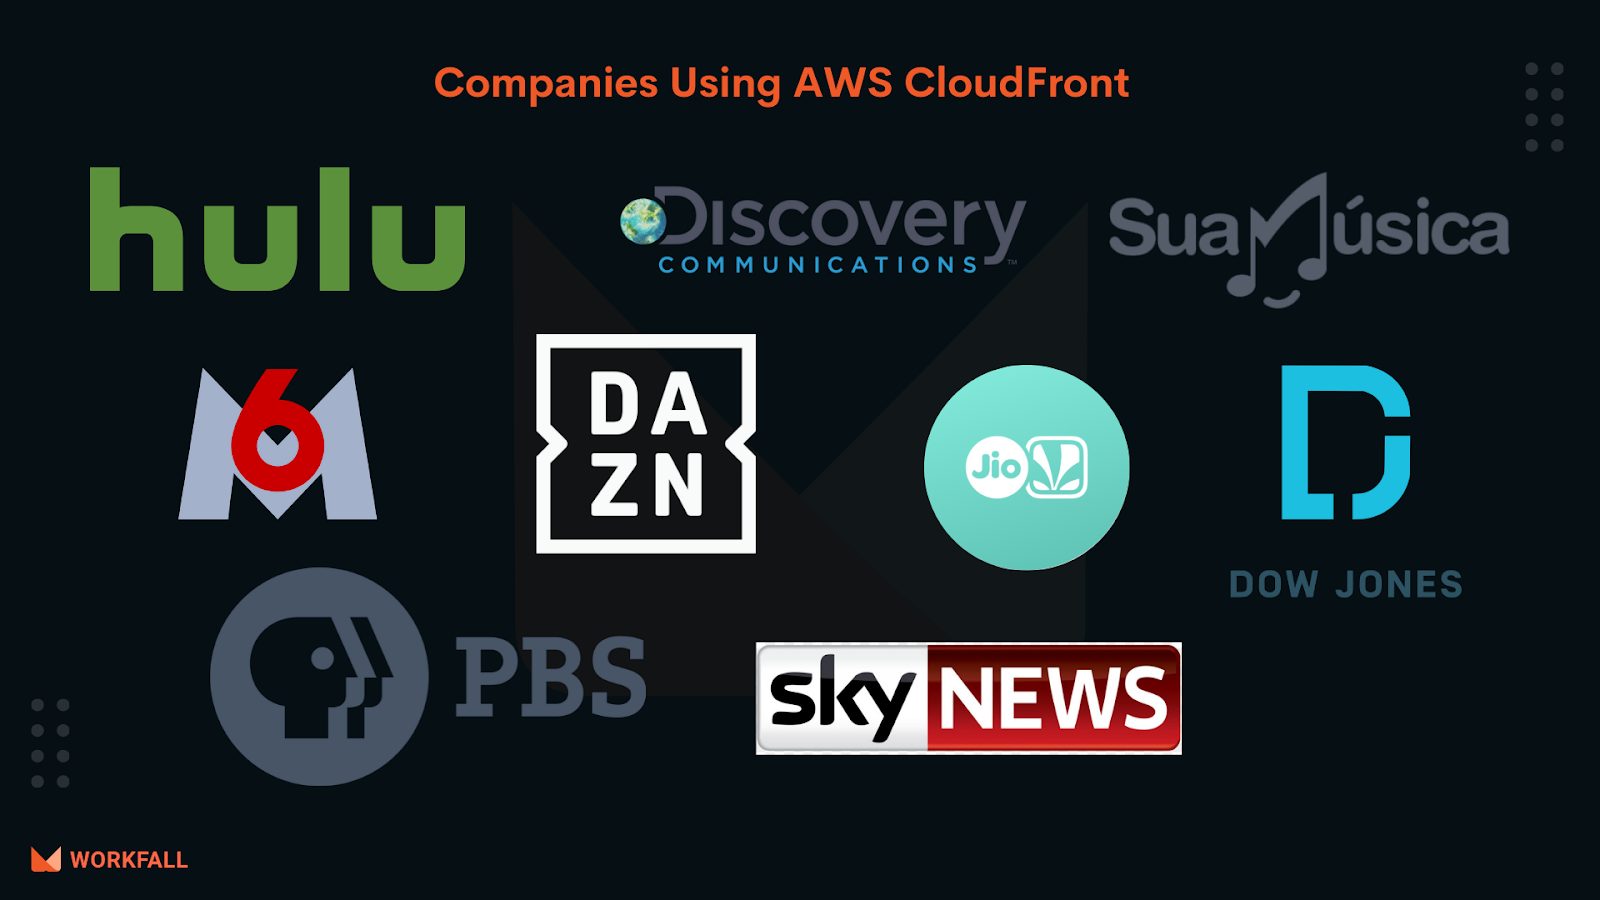 Companies using AWS CloudFront